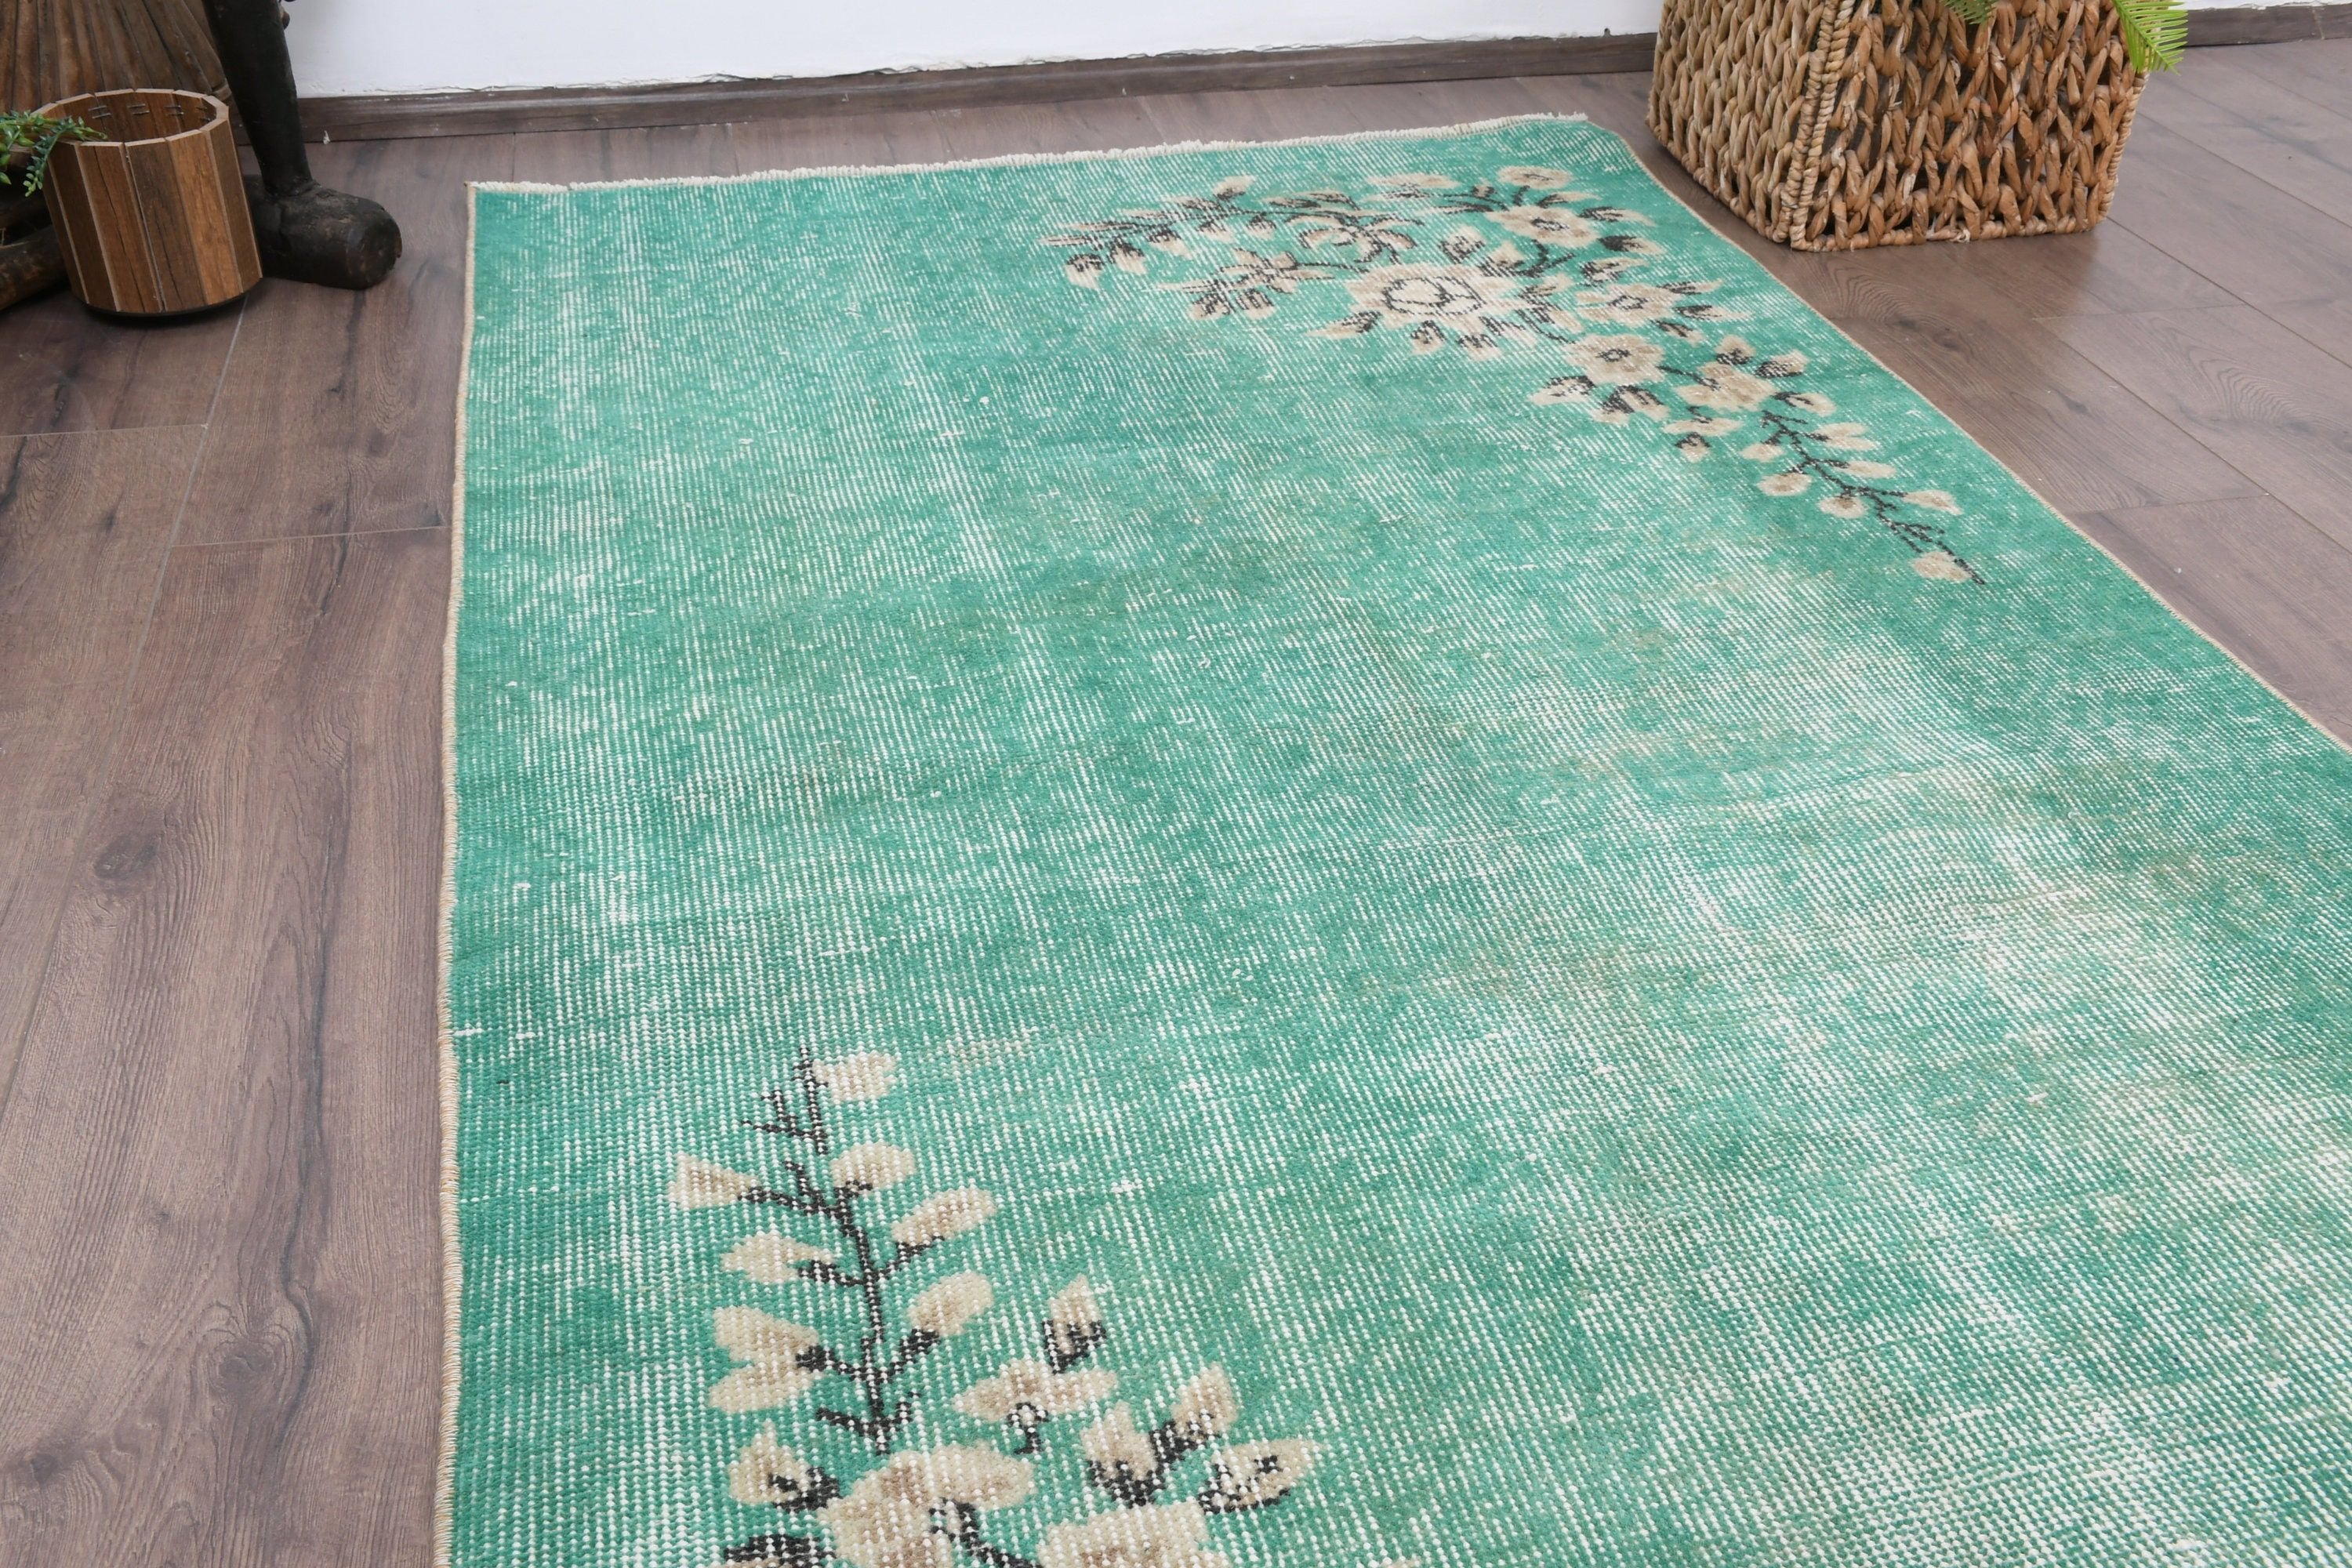 Vintage Rug, Entry Rugs, Green Oushak Rugs, Turkish Rugs, Eclectic Rug, 3.3x6 ft Accent Rug, Bedroom Rugs, Rugs for Kitchen, Oushak Rugs